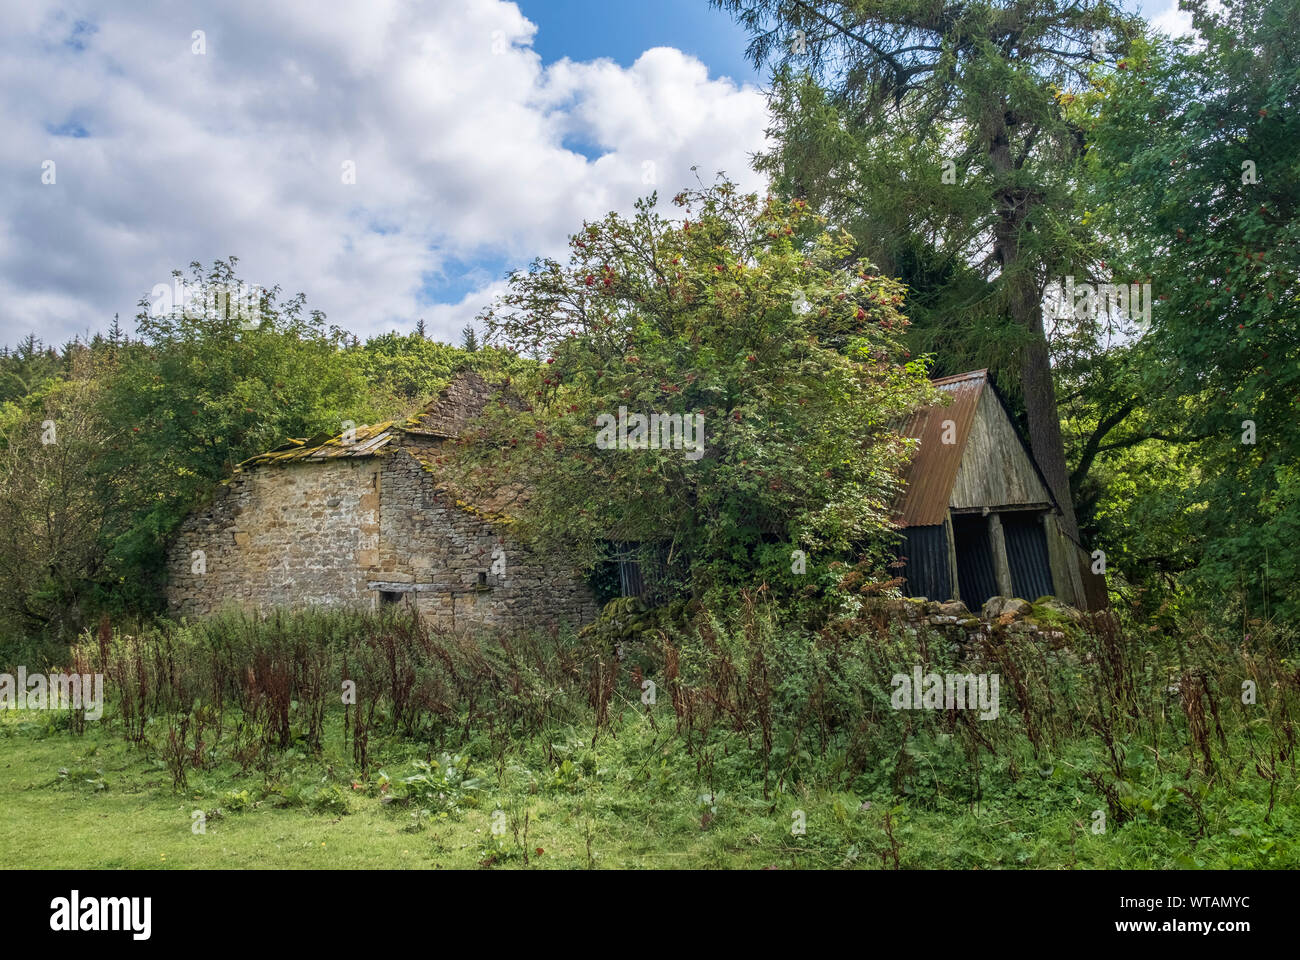 Ruins of a house in the English countryside returned to nature -abandoned and derelict ruin of a farmhouse and barn overgrown by vegetation and trees Stock Photo